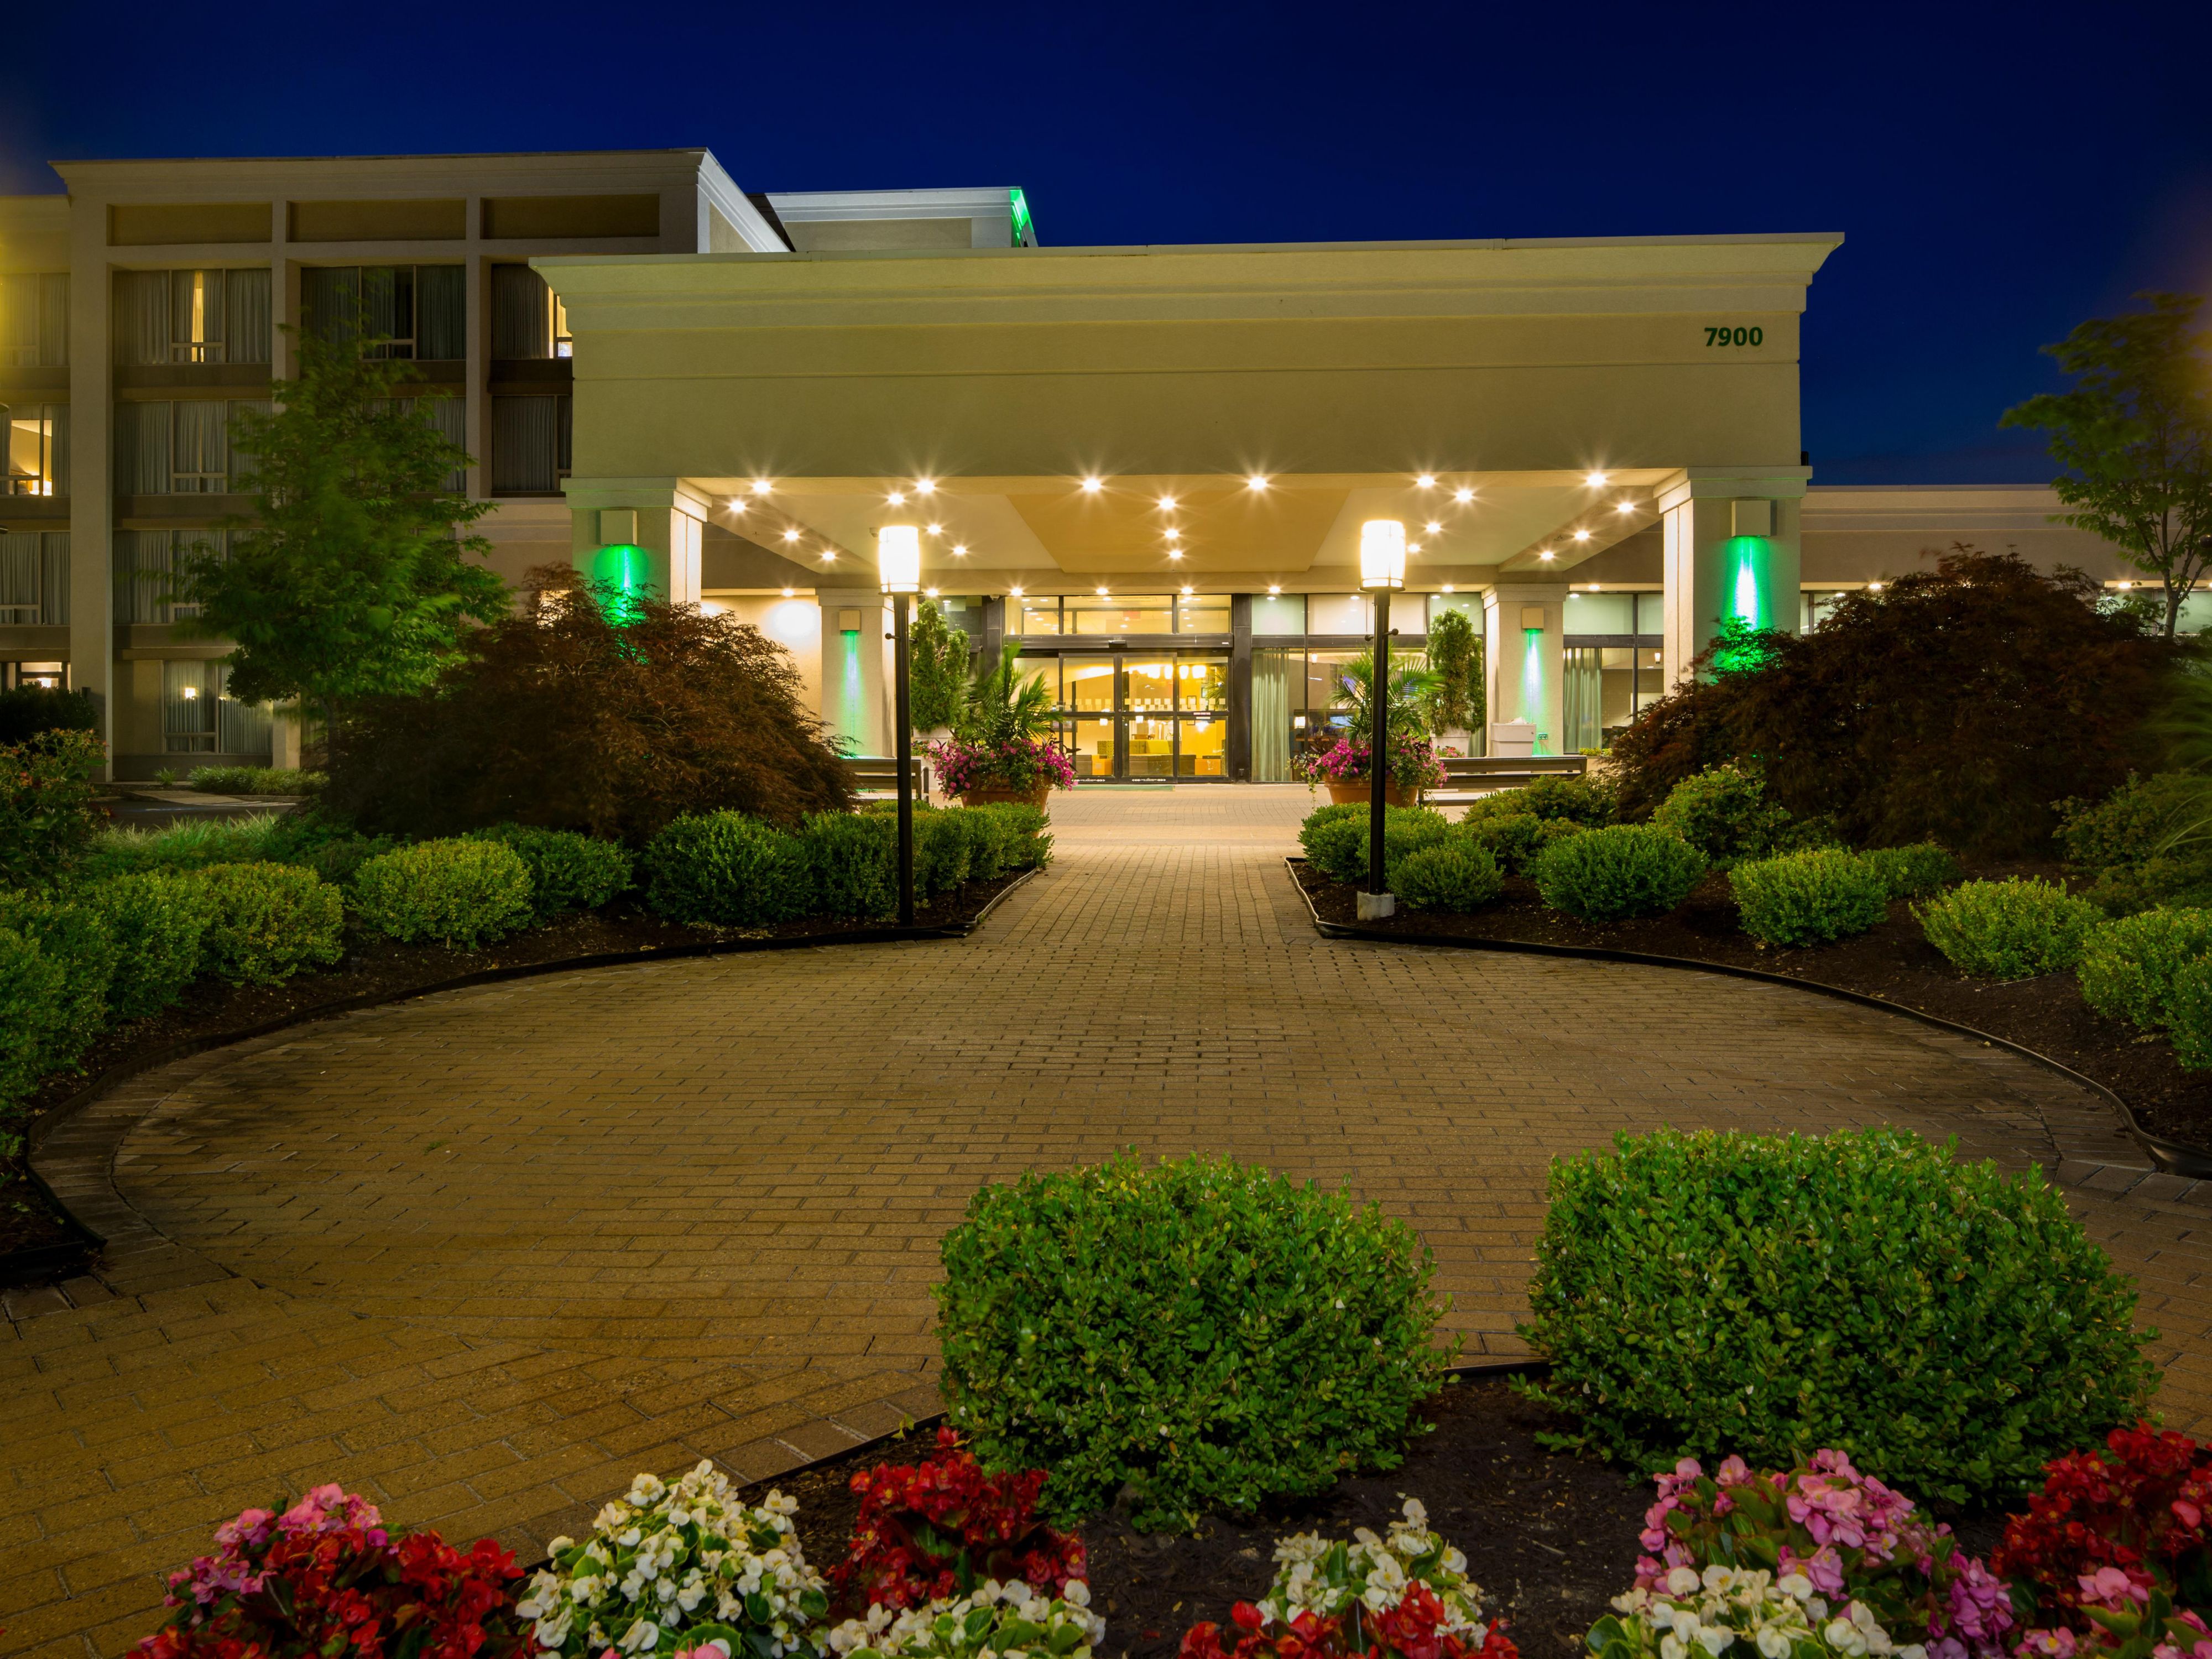 Never worry about finding a place to park when you stay at the Holiday Inn® Columbia East-Jessup. We offer complimentary guest parking and shuttle service to get around town. Stay connected with home and colleagues with free Wi-Fi. Check your emails, post photos on social media, and stream music. Do the things you like to do even when you travel.